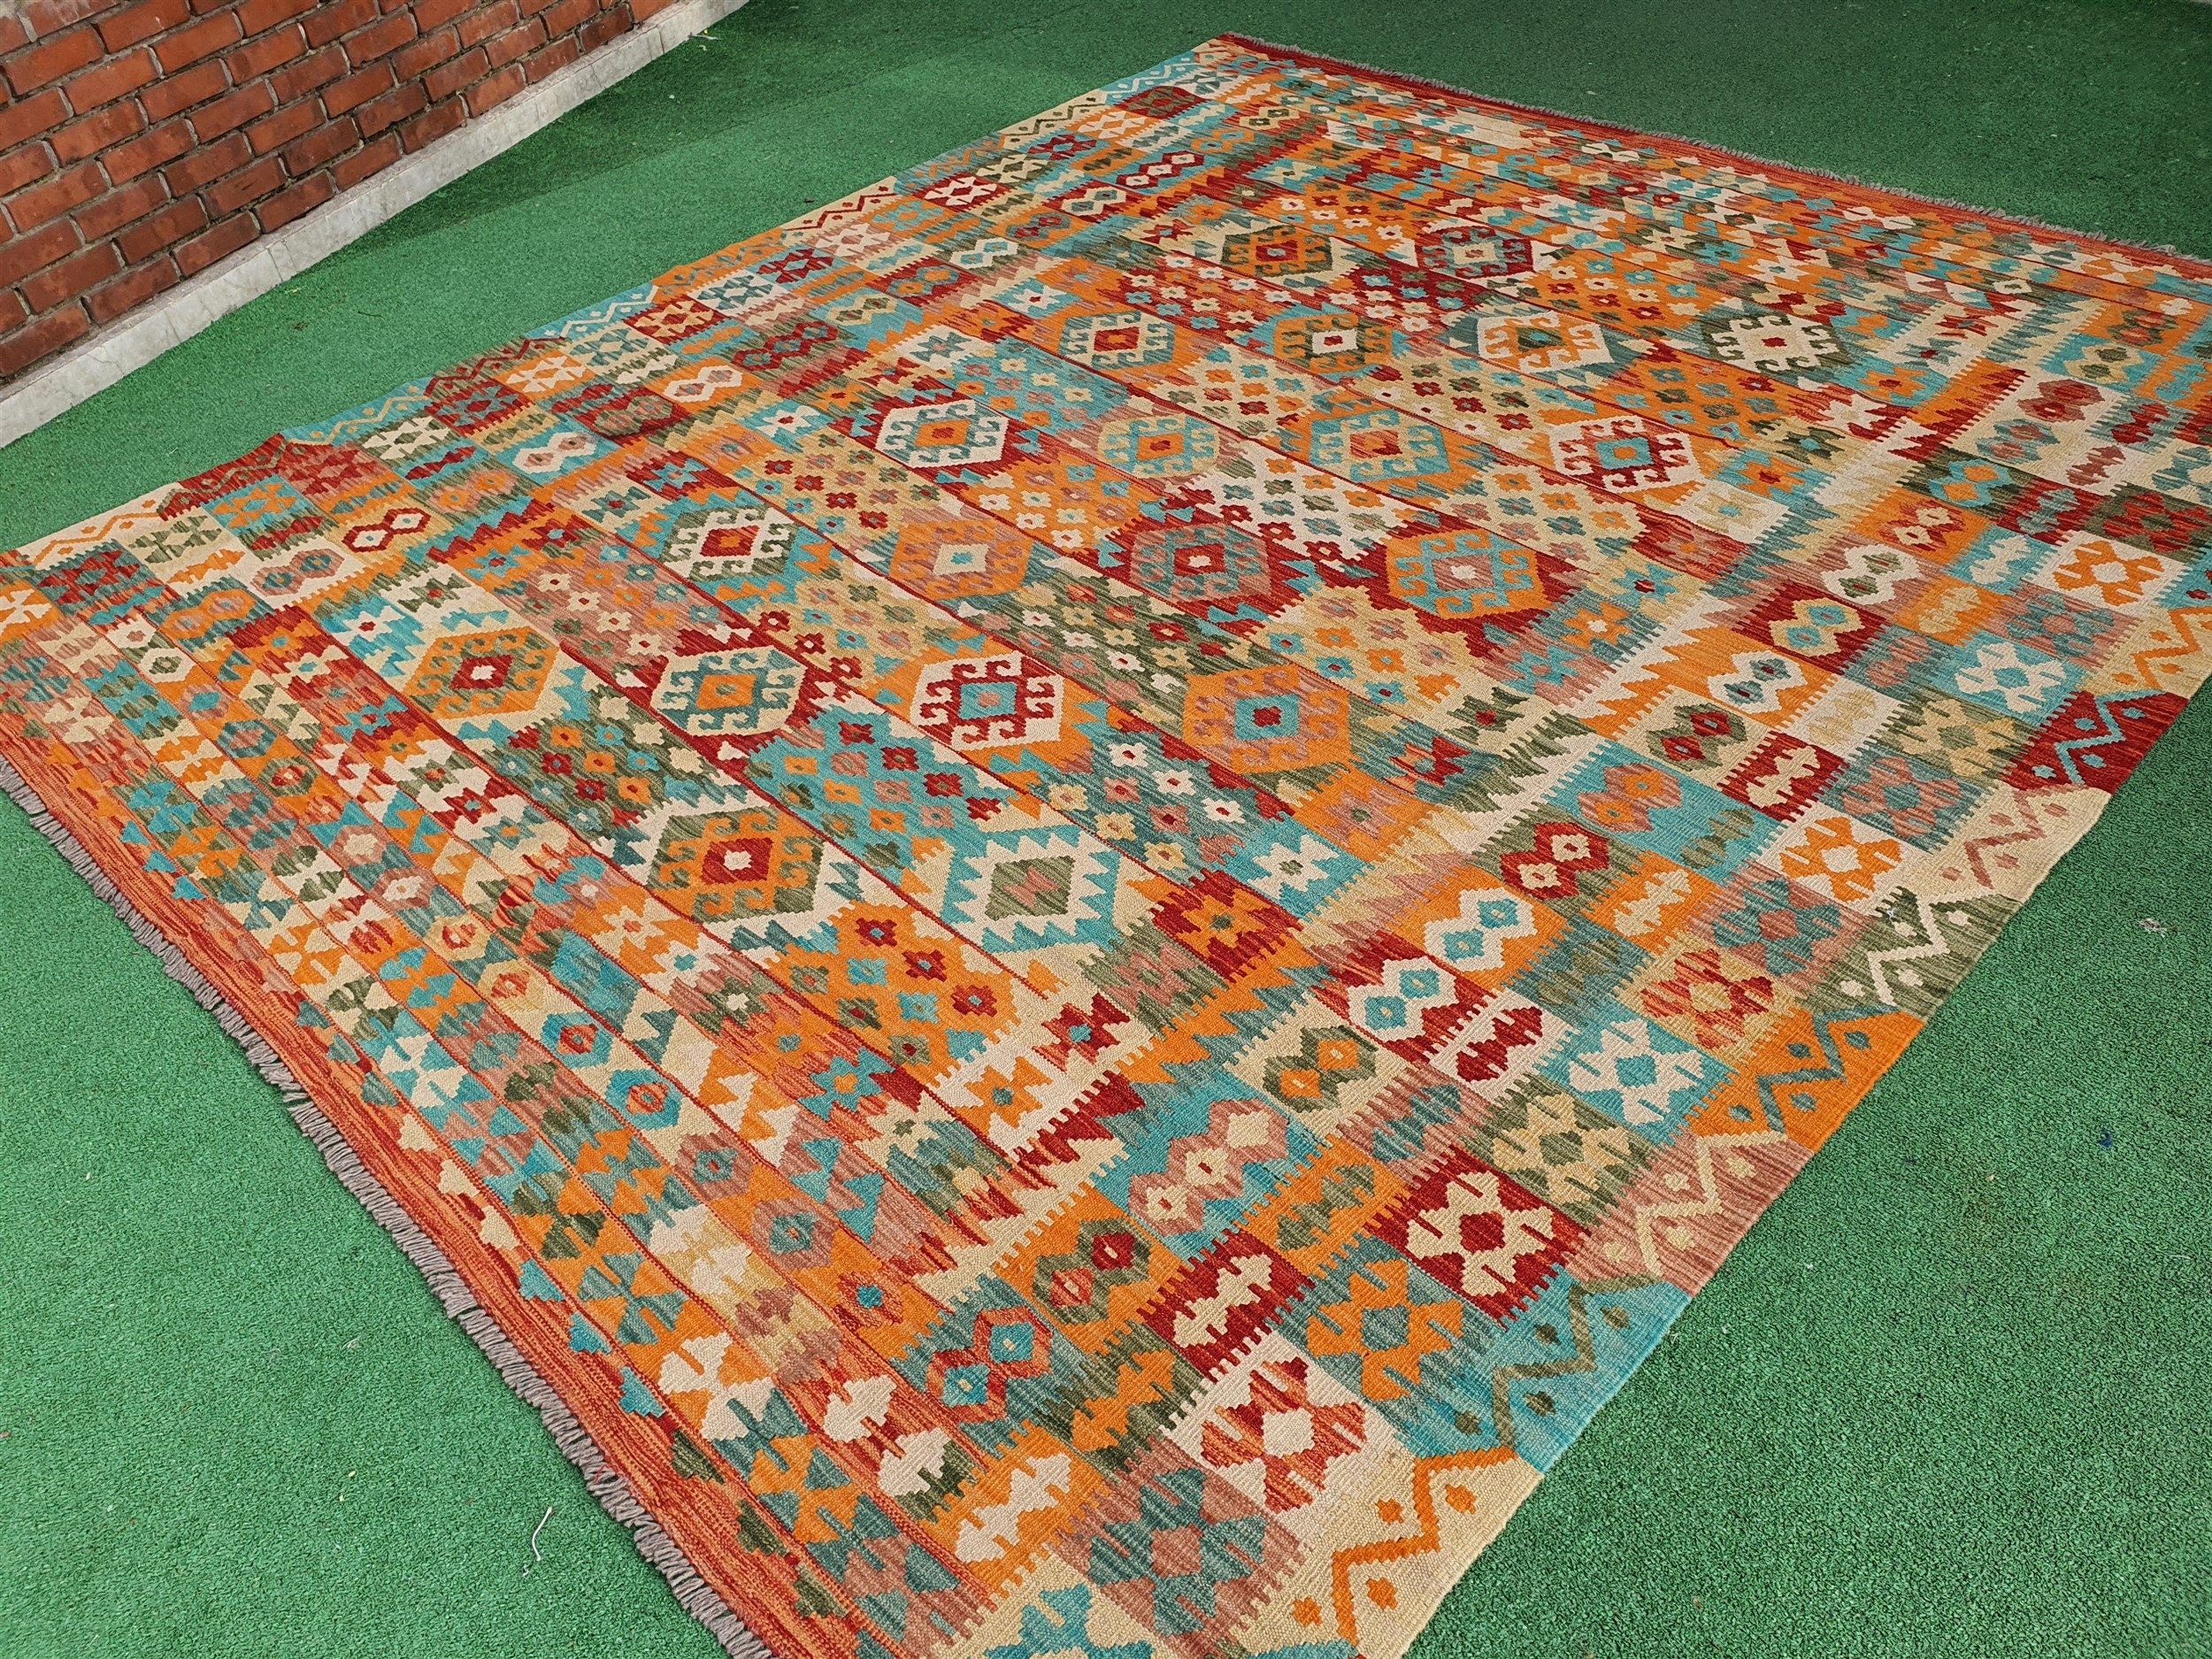 Afghan Kilim Rug, 9 x 8 ft Very Large Rust Red Blue and Off White Turkish Contemporary Kilim